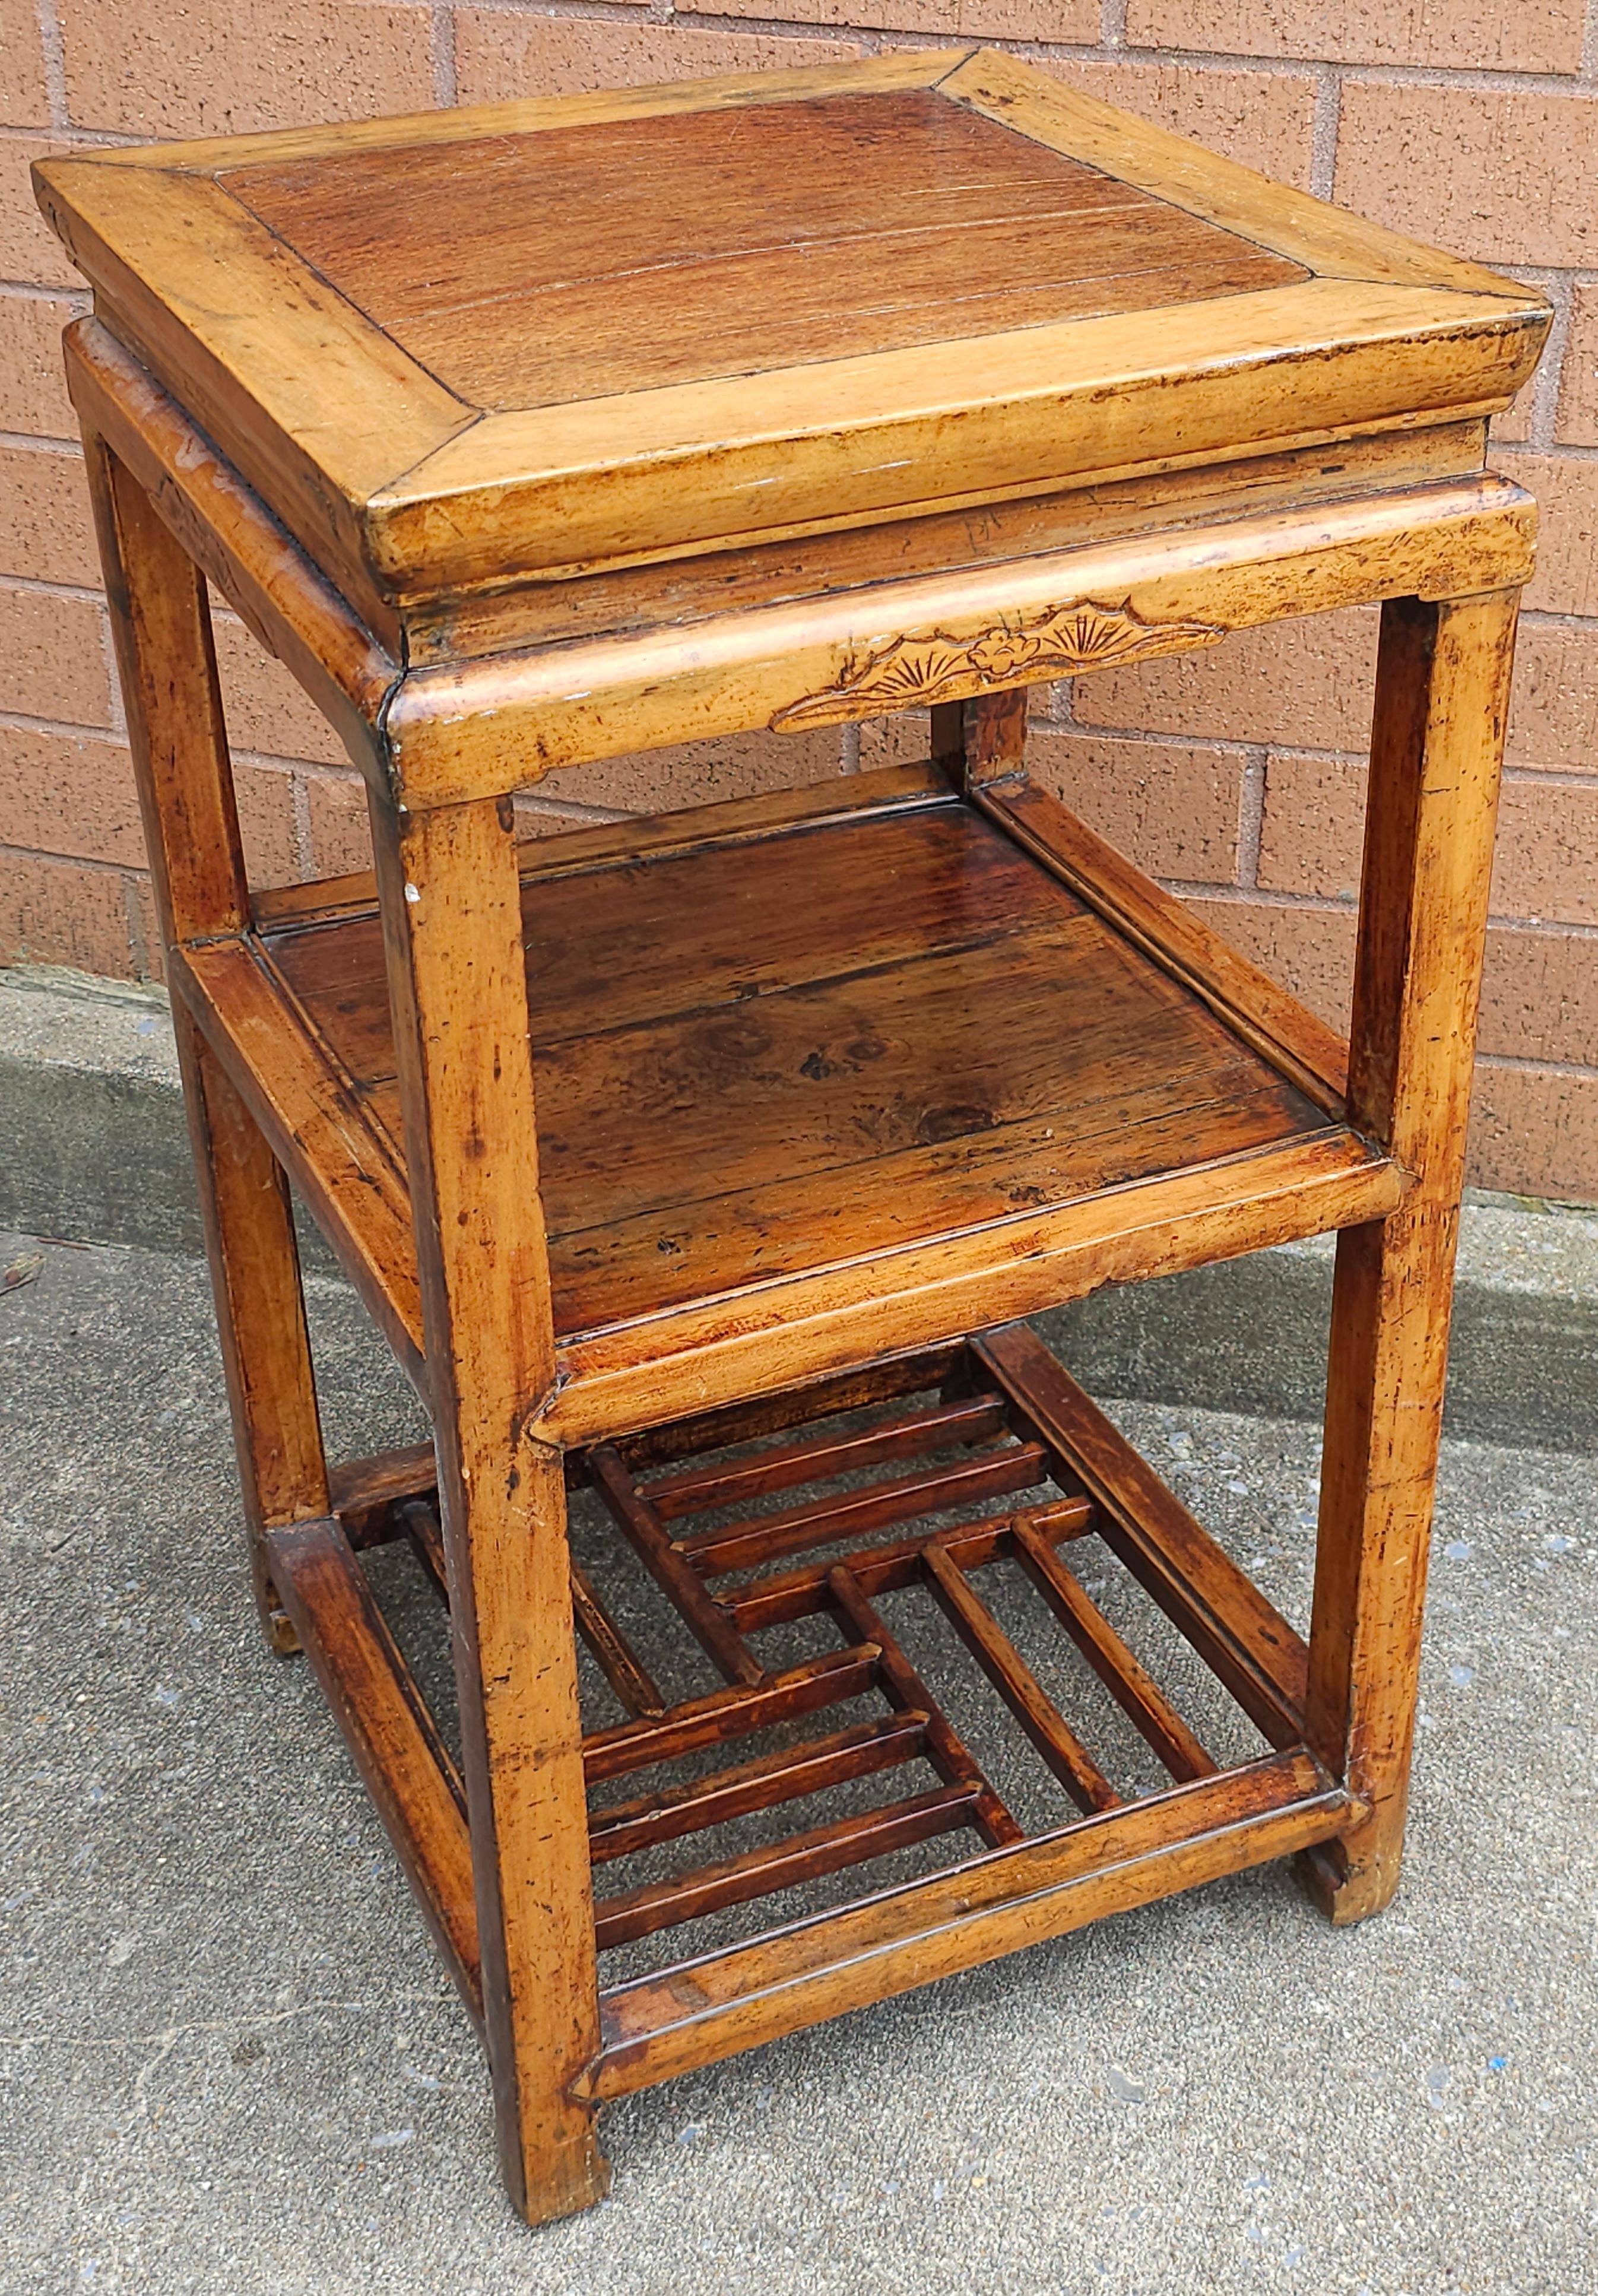 19th Century South East Asian Three-Tier Elmwood Side Table In Good Condition For Sale In Germantown, MD